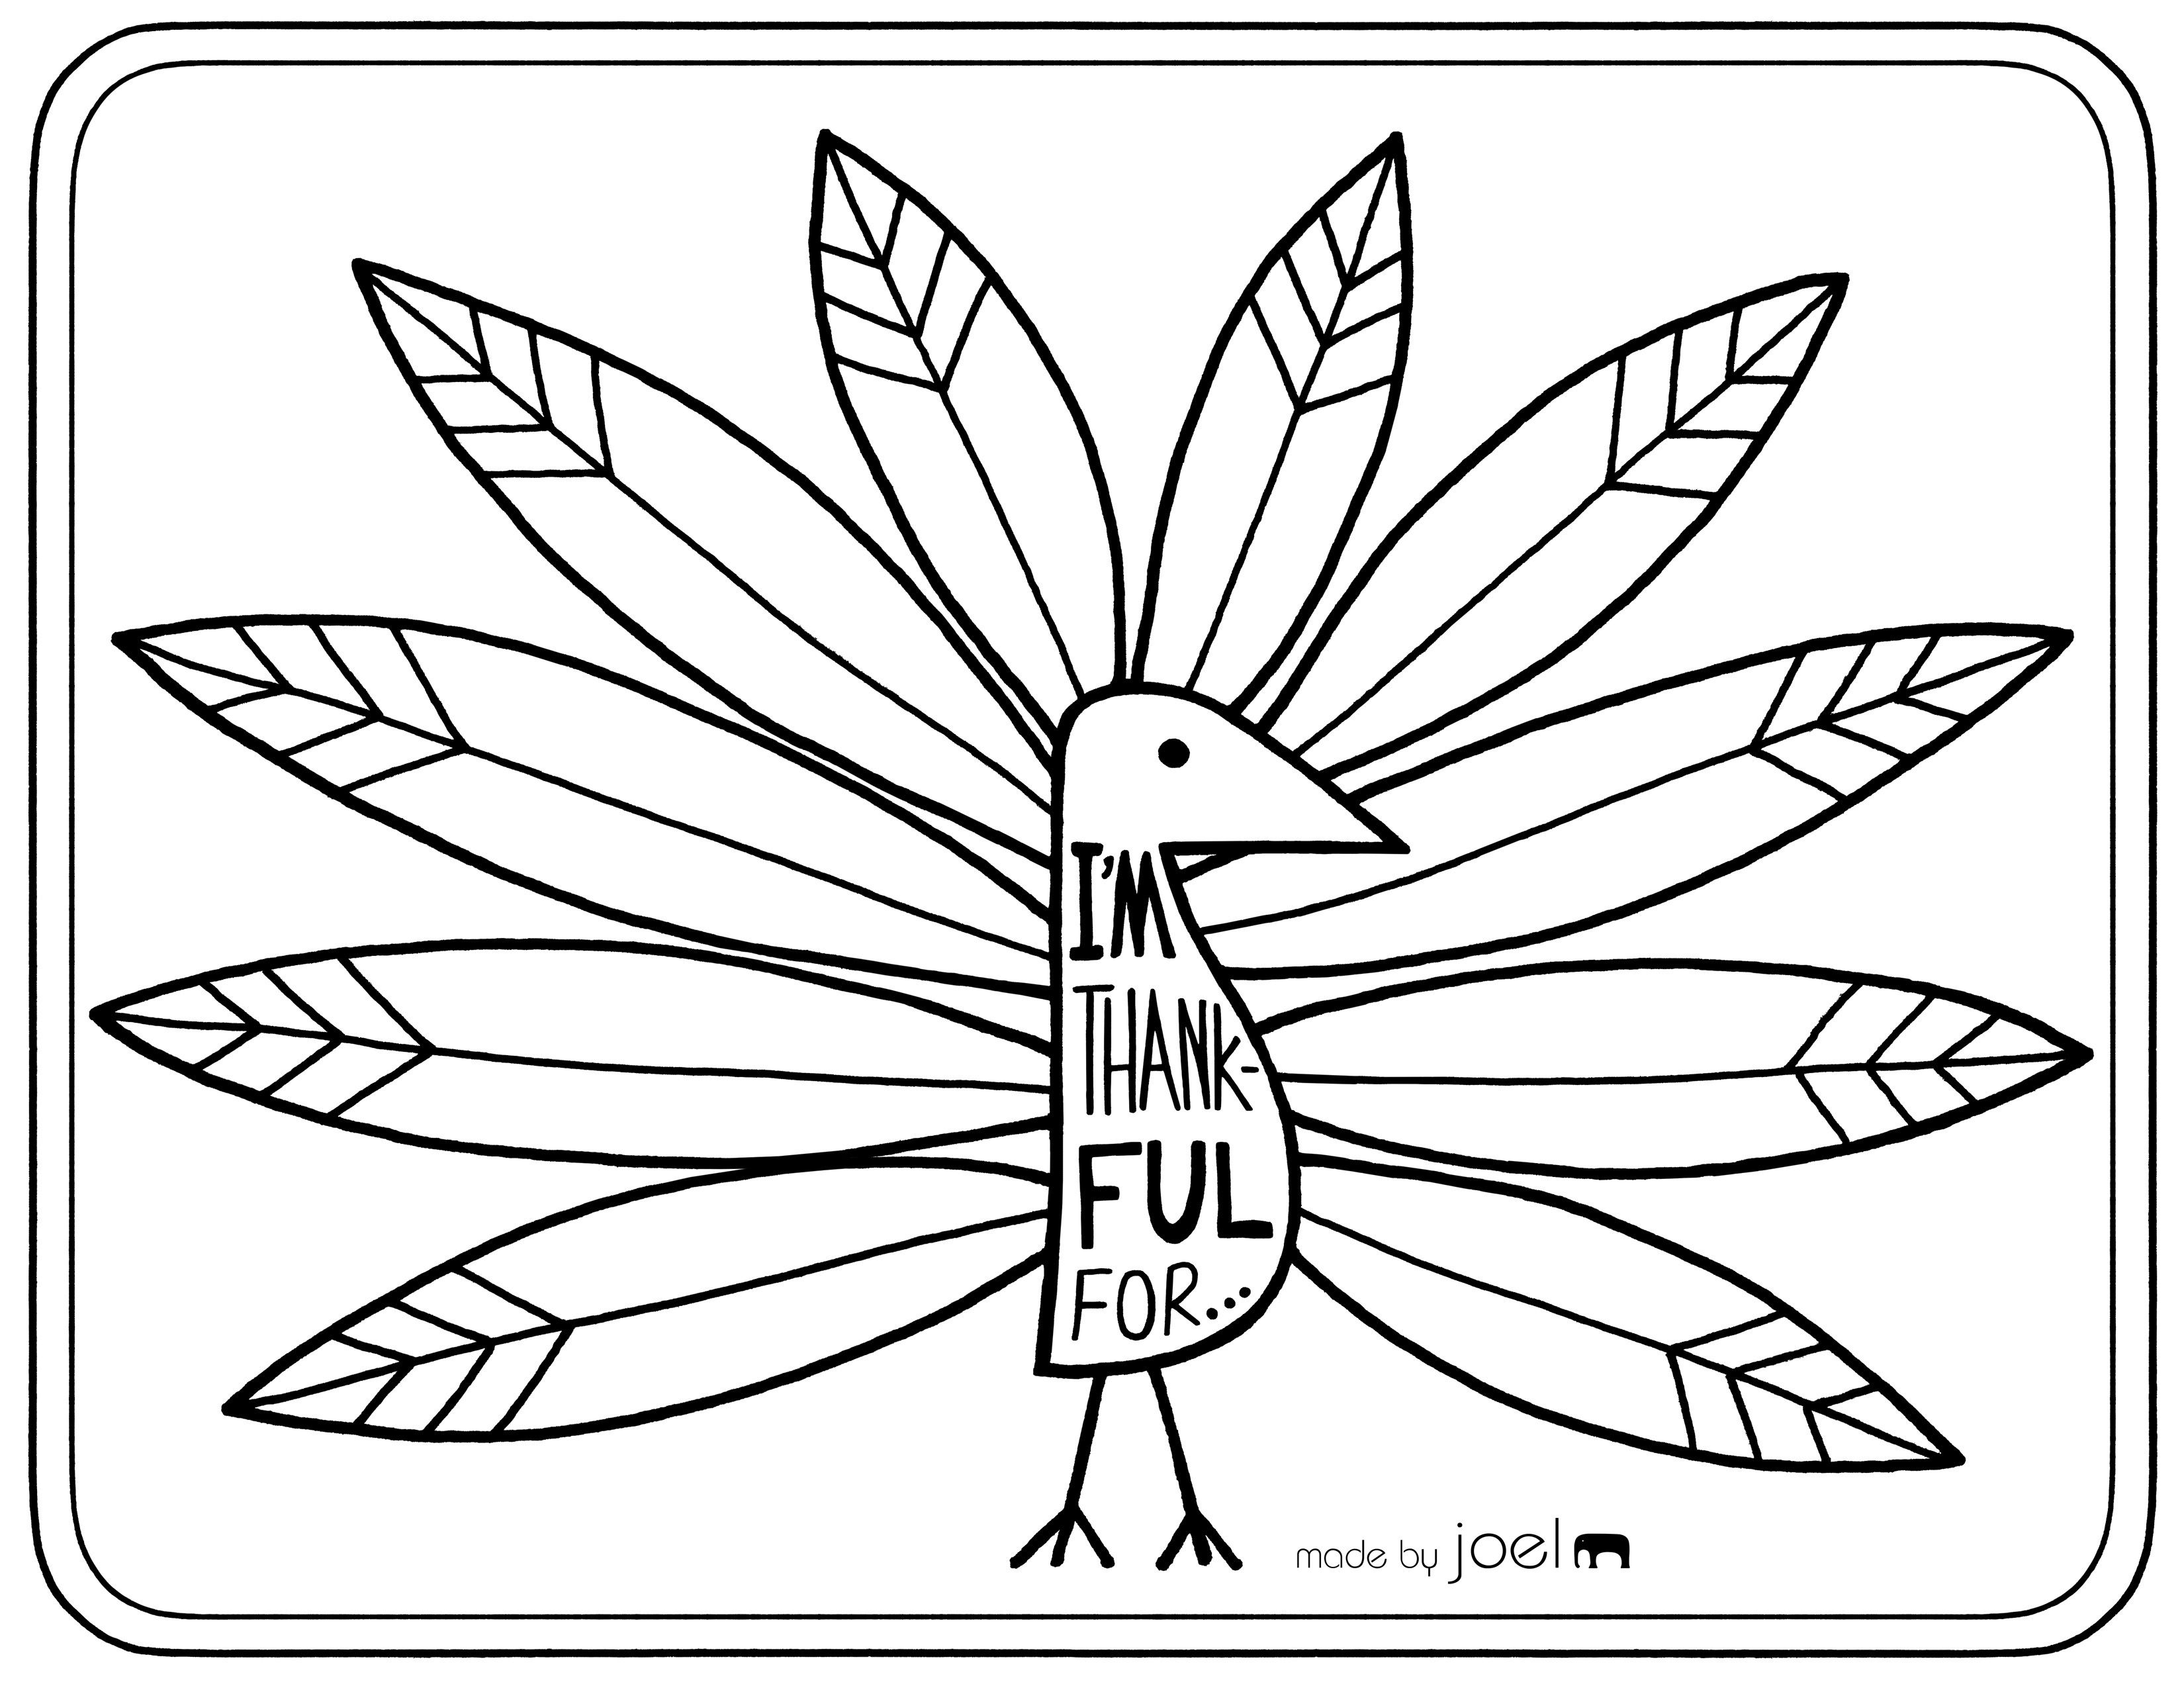 Free Printable Placemat For Giving Thanks | Fall Crafts &amp;amp; Ideas - Free Printable Thanksgiving Coloring Placemats